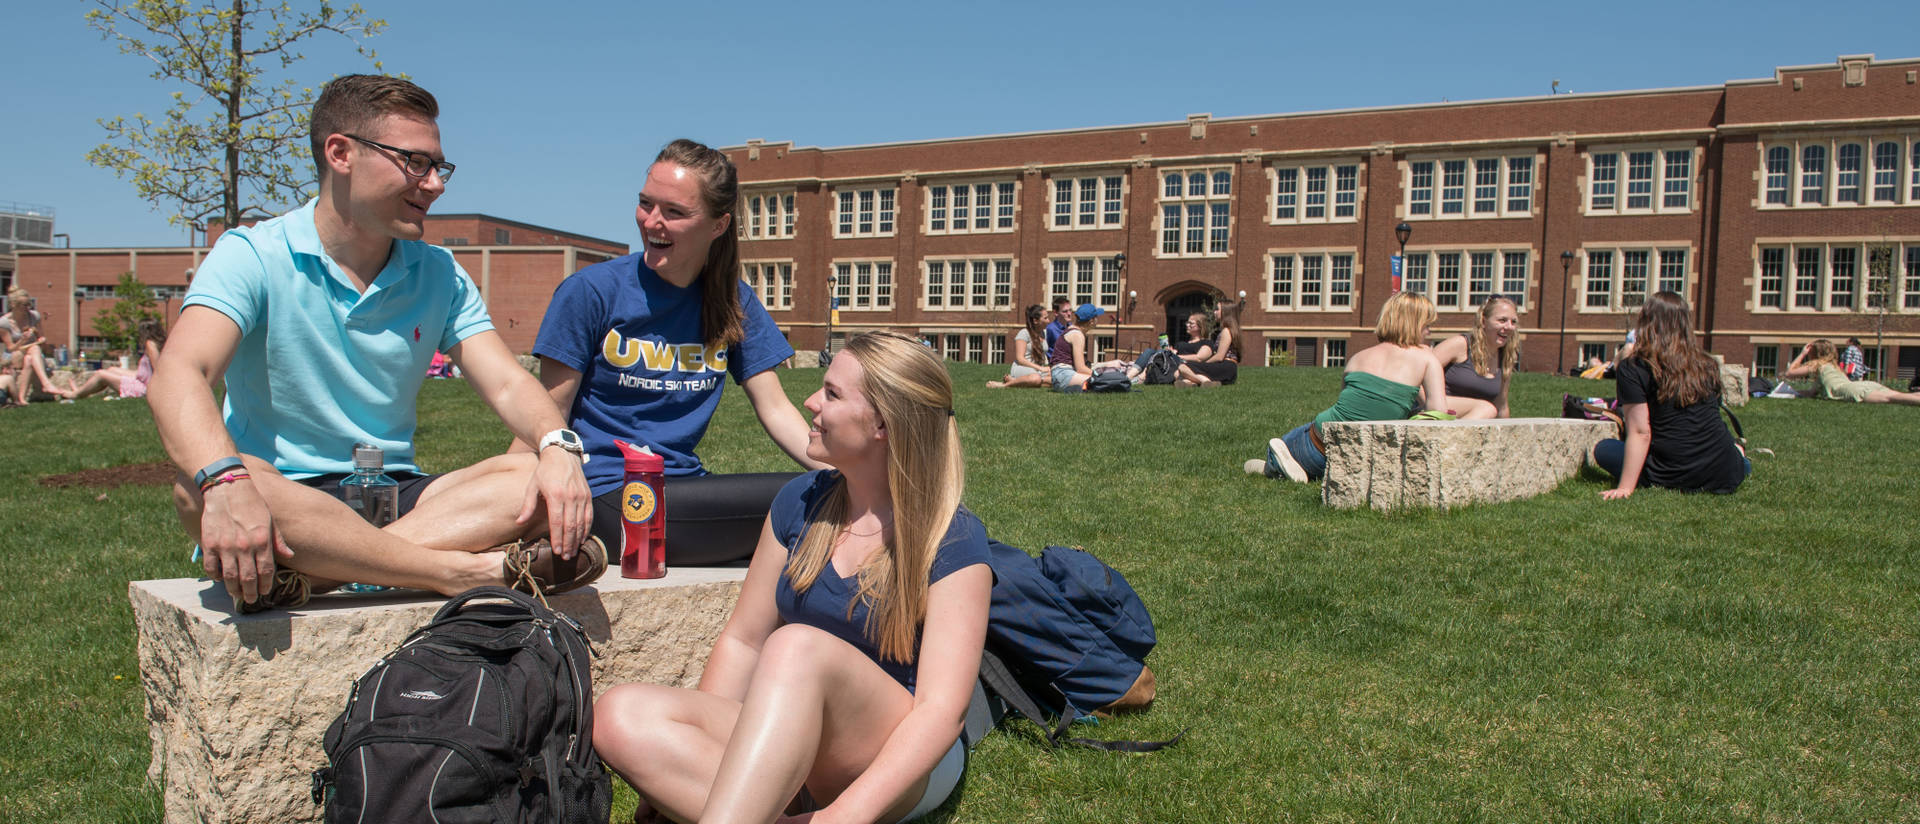 Students enjoy lower campus on a warm spring day.